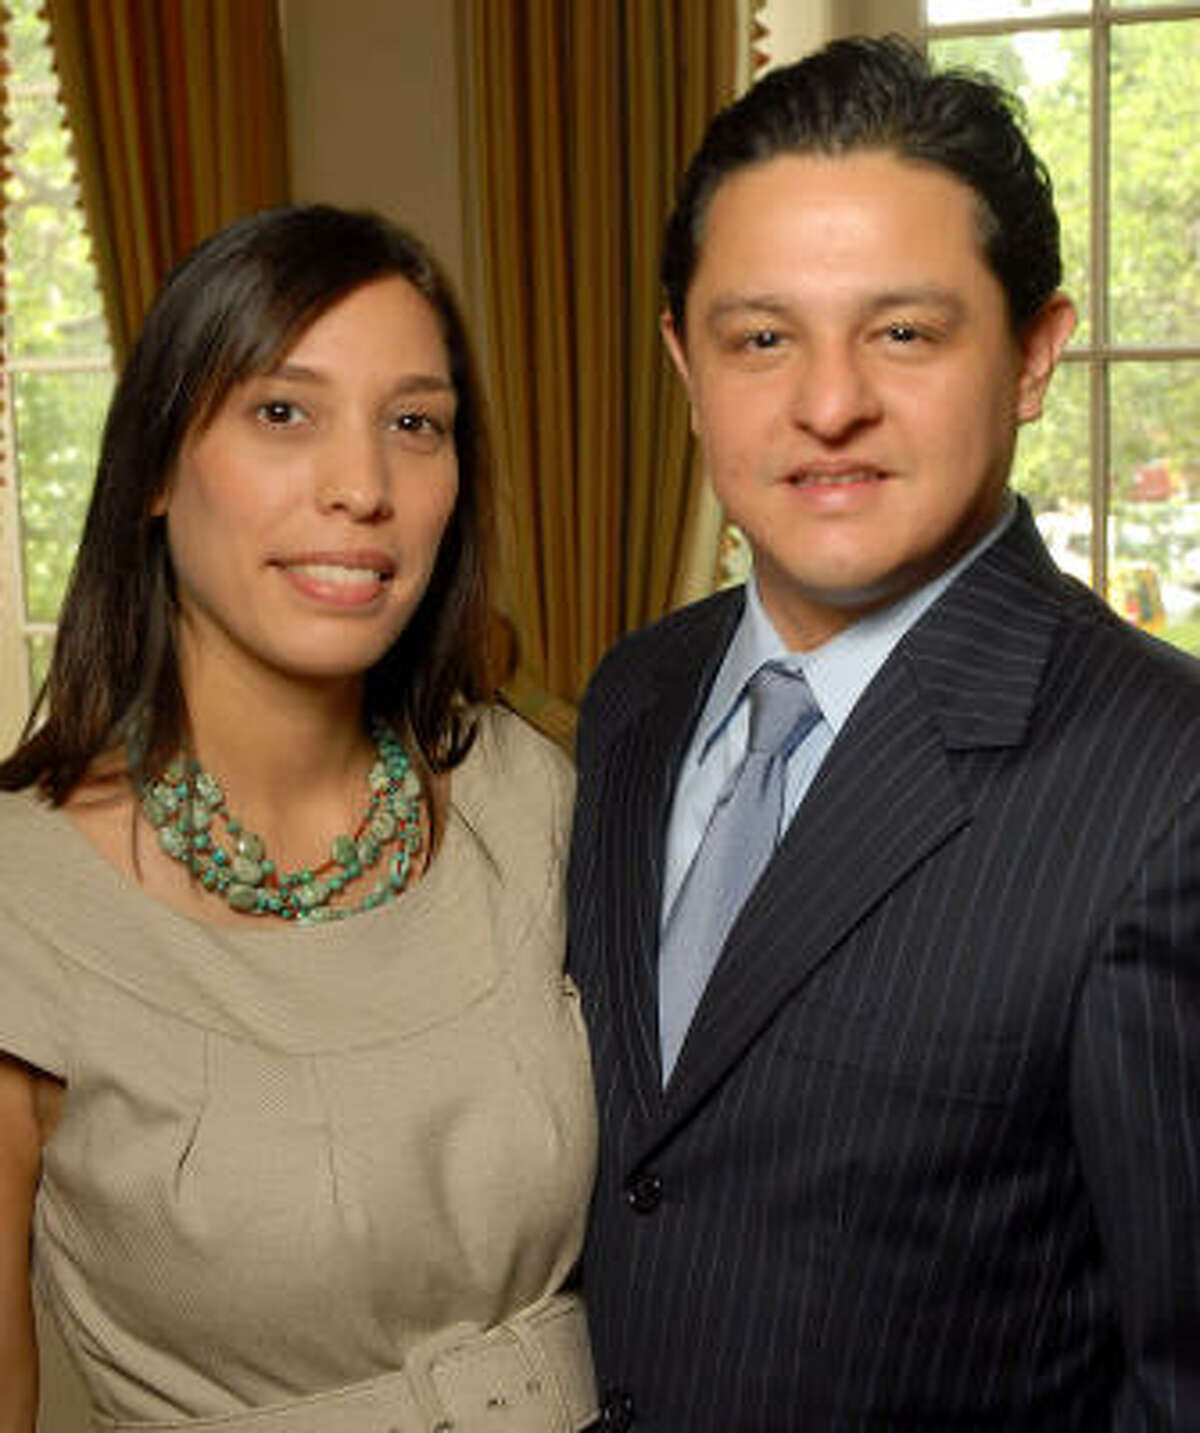 Former Houston Councilman James Rodriguez, shown with Wendy Montoya Rodrigues at a 2009 social event, has been tapped as chief of staff to Pasadena's incoming mayor, Jeff Wagner.